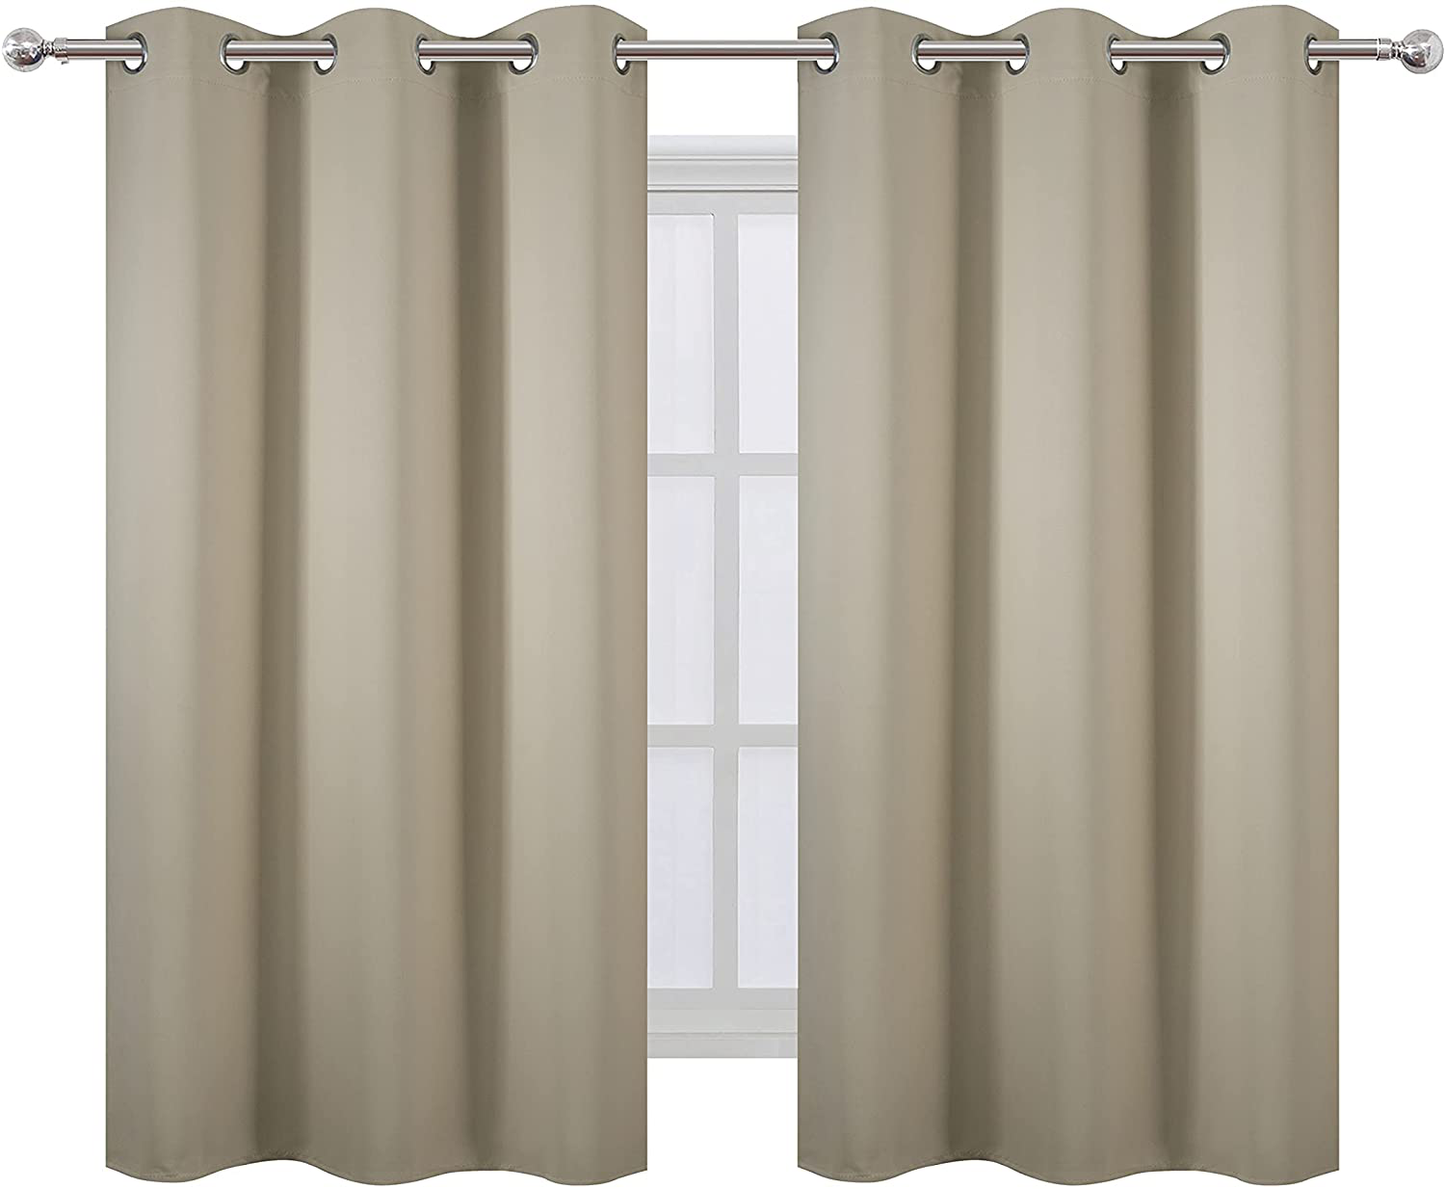 LEMOMO Cappuccino Thermal Blackout Curtains/42 x 95 Inch/Set of 2 Panels Room Darkening Curtains for Bedroom